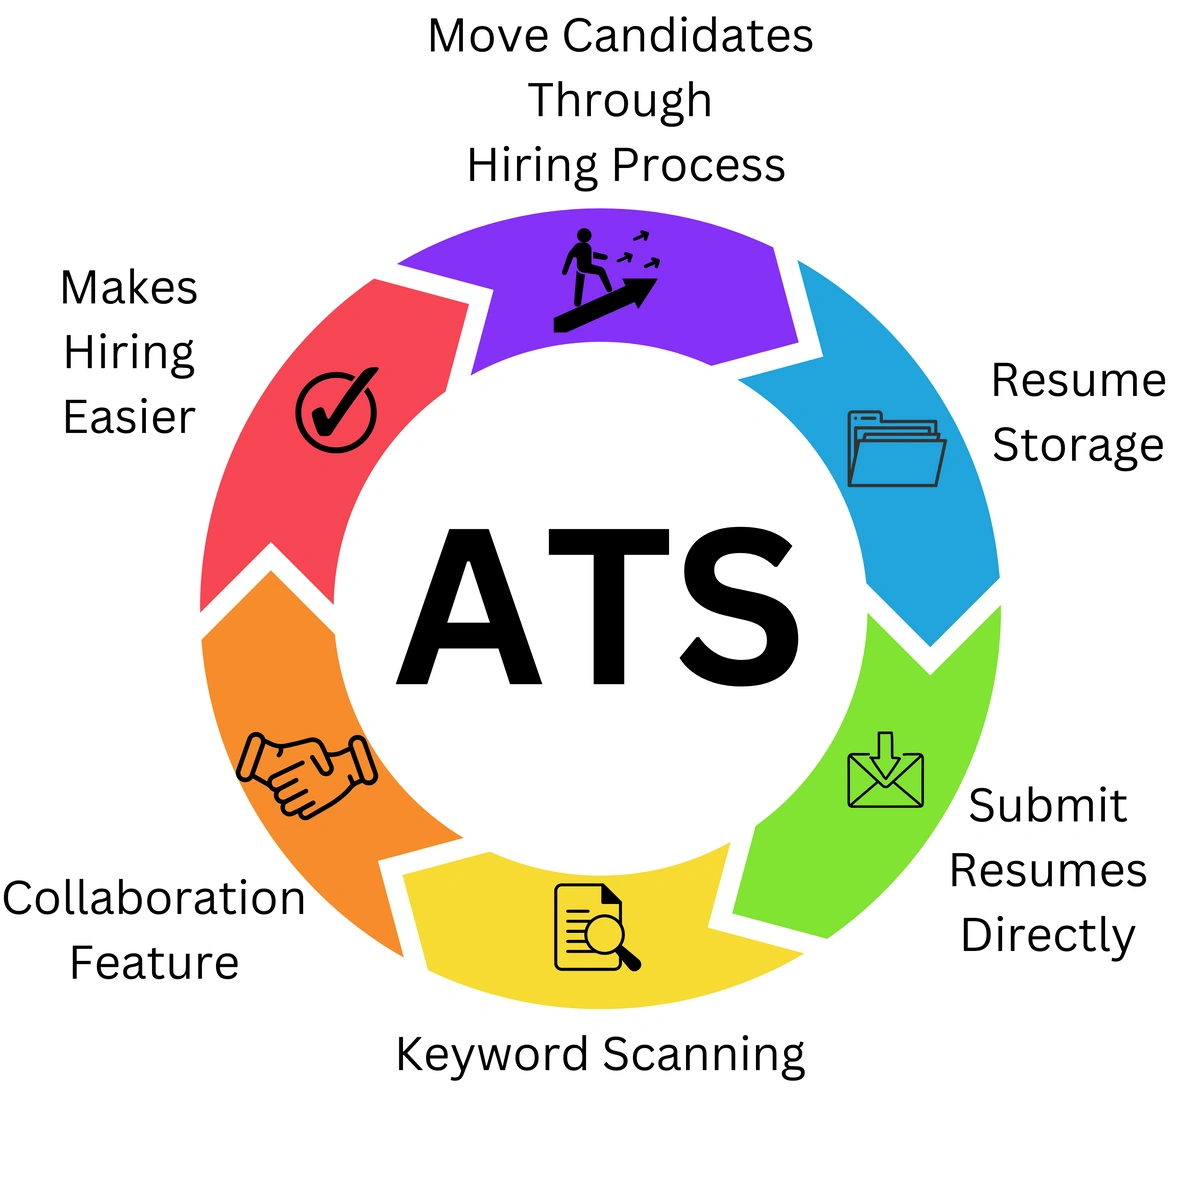 How ATS works